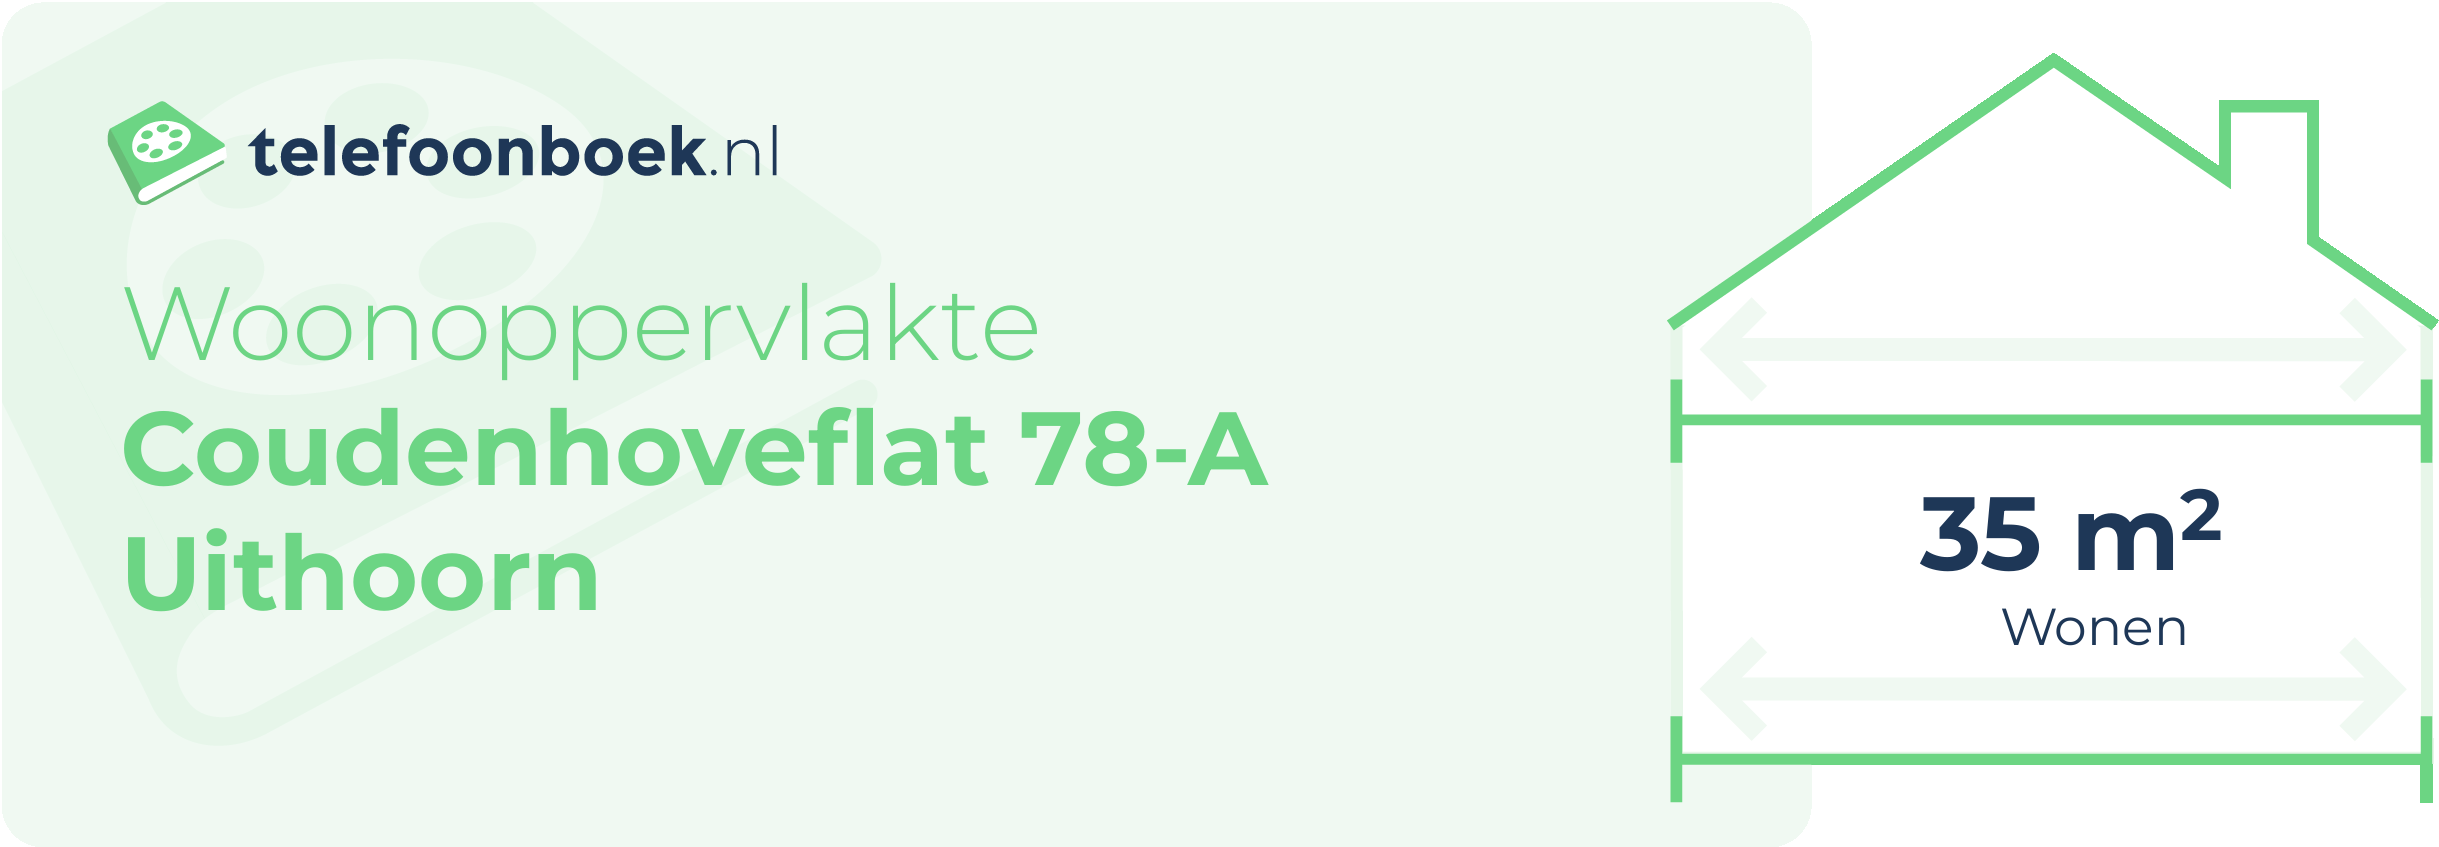 Woonoppervlakte Coudenhoveflat 78-A Uithoorn